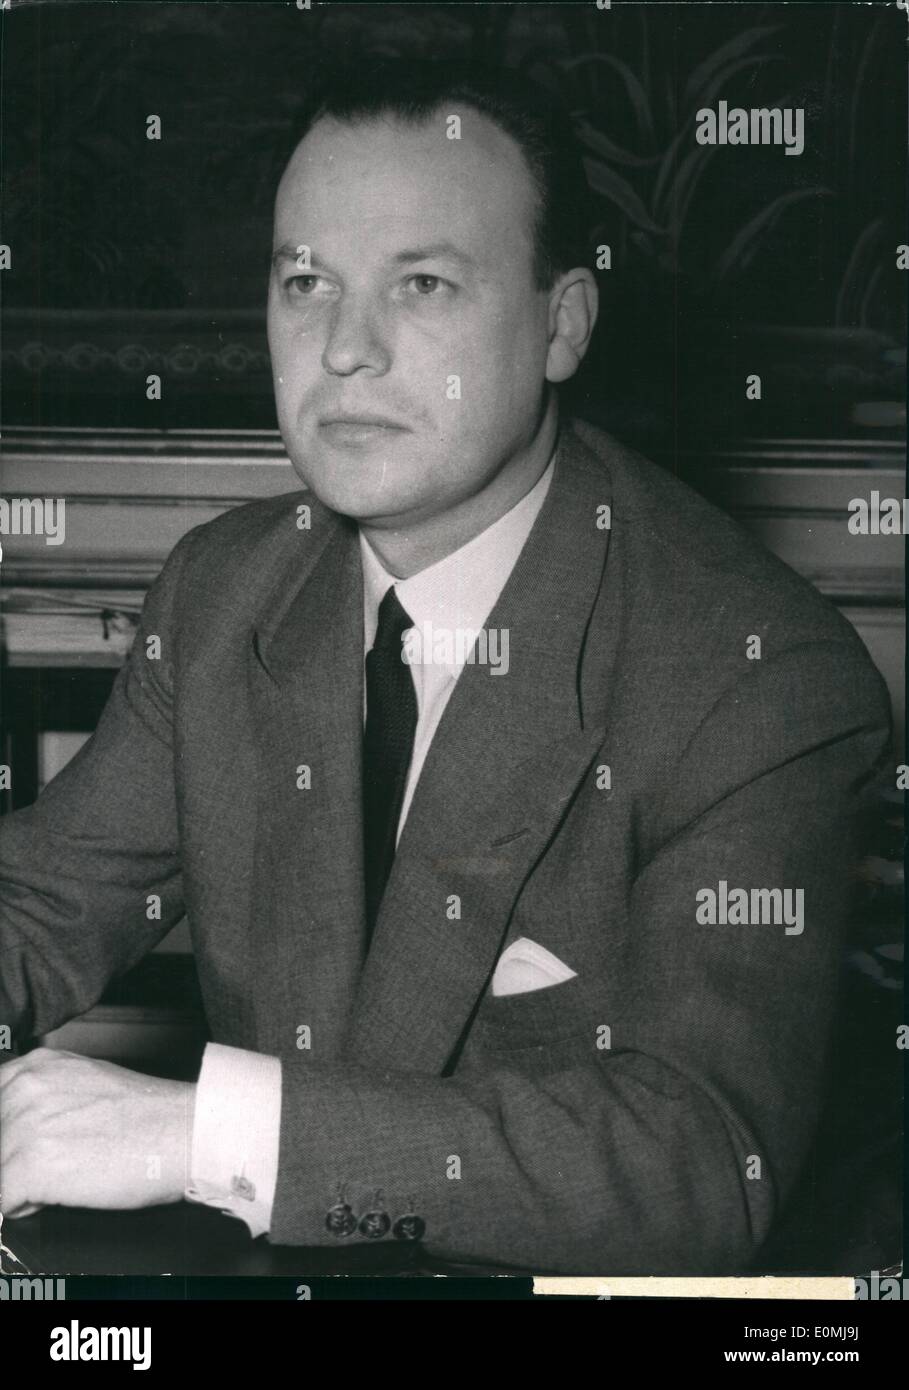 Jun. 06, 1955 - This Man Is To Handle The Housing Shortage Problem M. Pierre Sudreau, Assistant Director of M. Edgar Faure's cabinet, who has been appointed Minister of Housing and Construction. Stock Photo